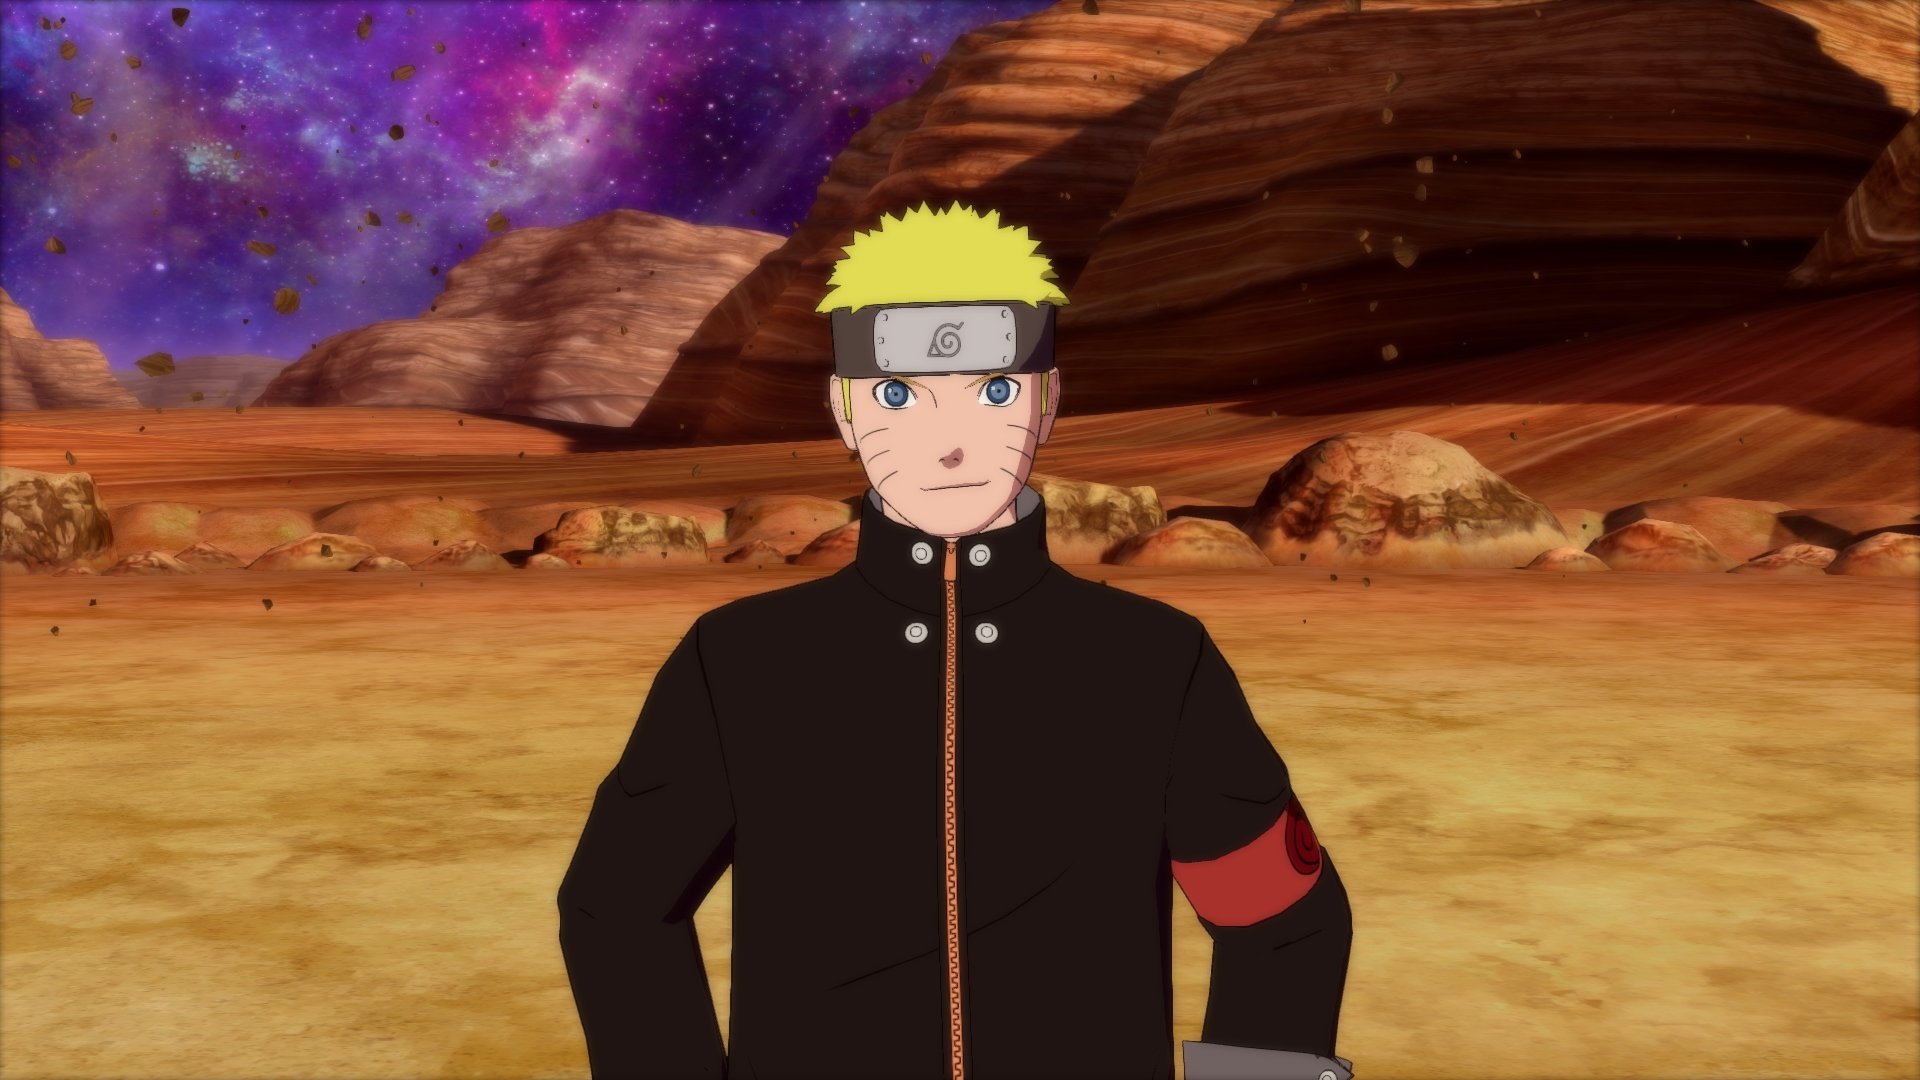 Awesome Naruto Shippuden: Ultimate Ninja Storm 4 free background ID:408775 for full hd desktop